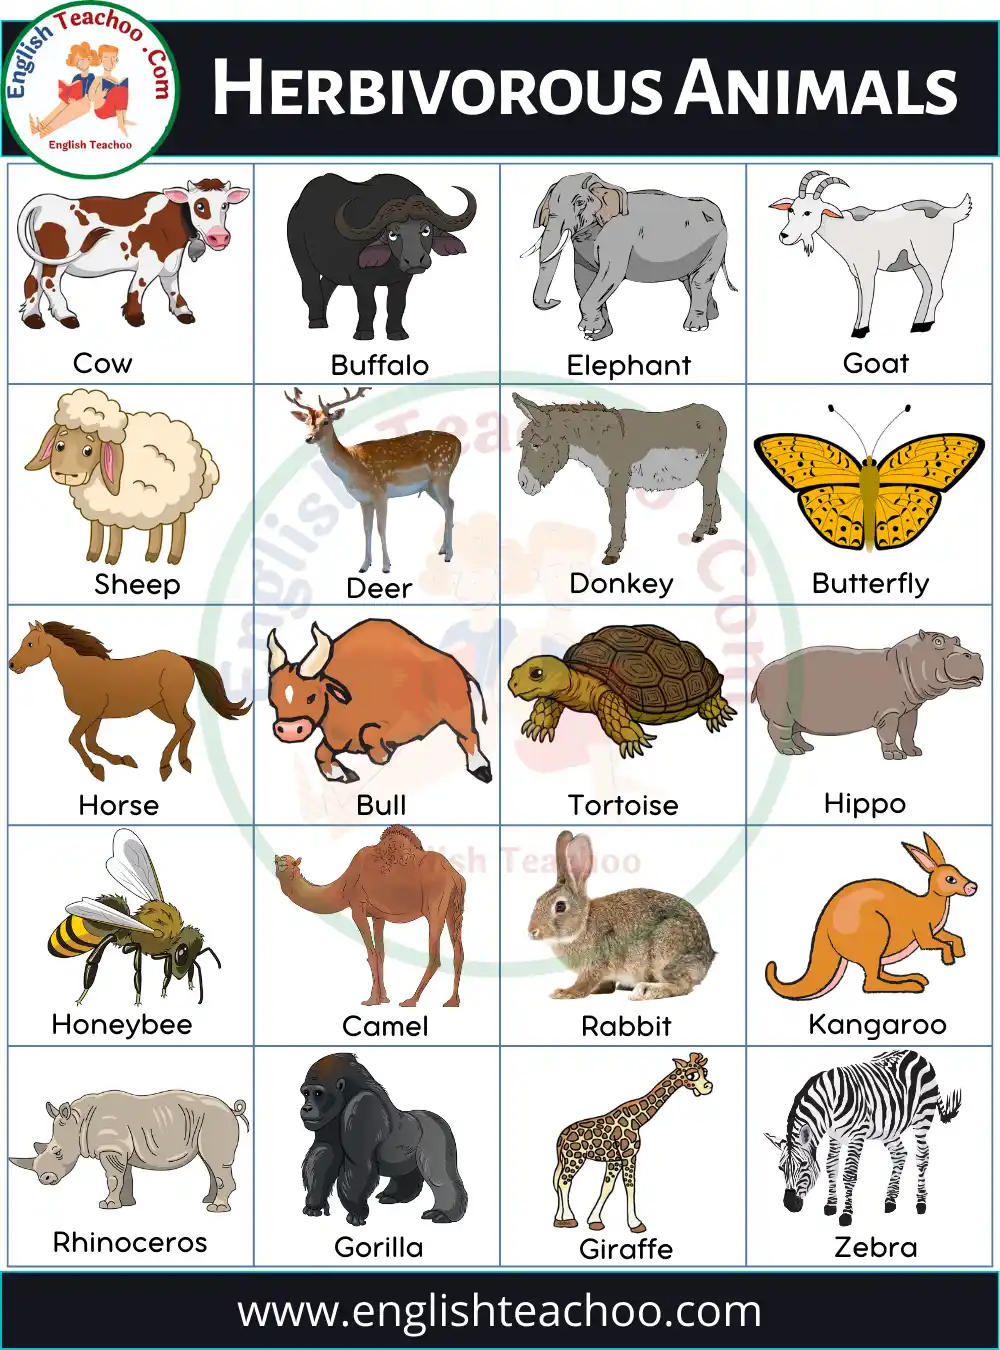 20 Herbivorous Animals Name List and Examples